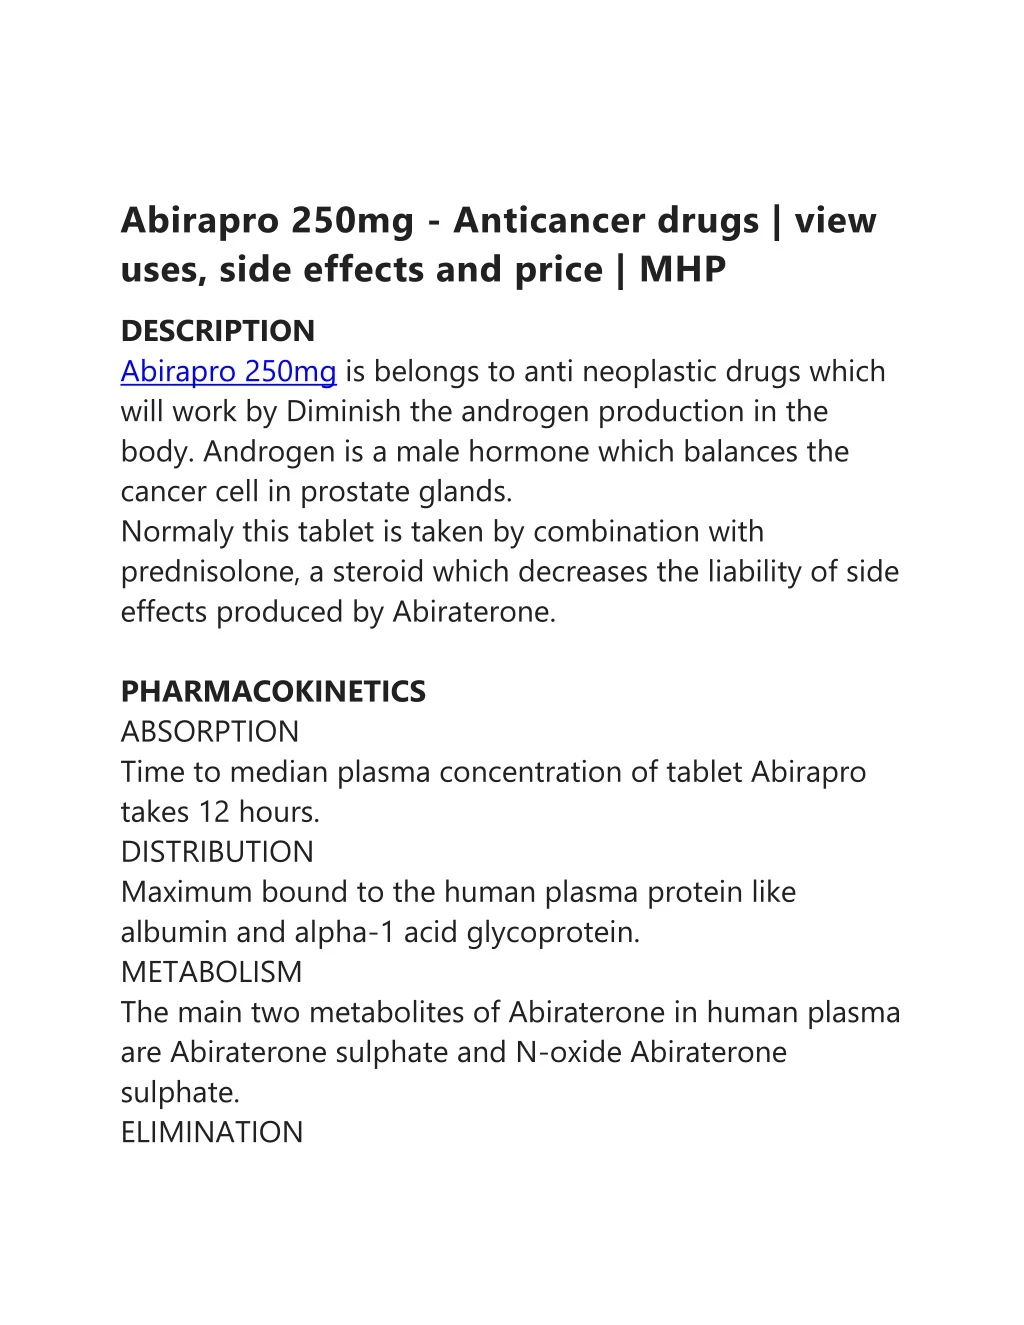 abirapro 250mg anticancer drugs view uses side